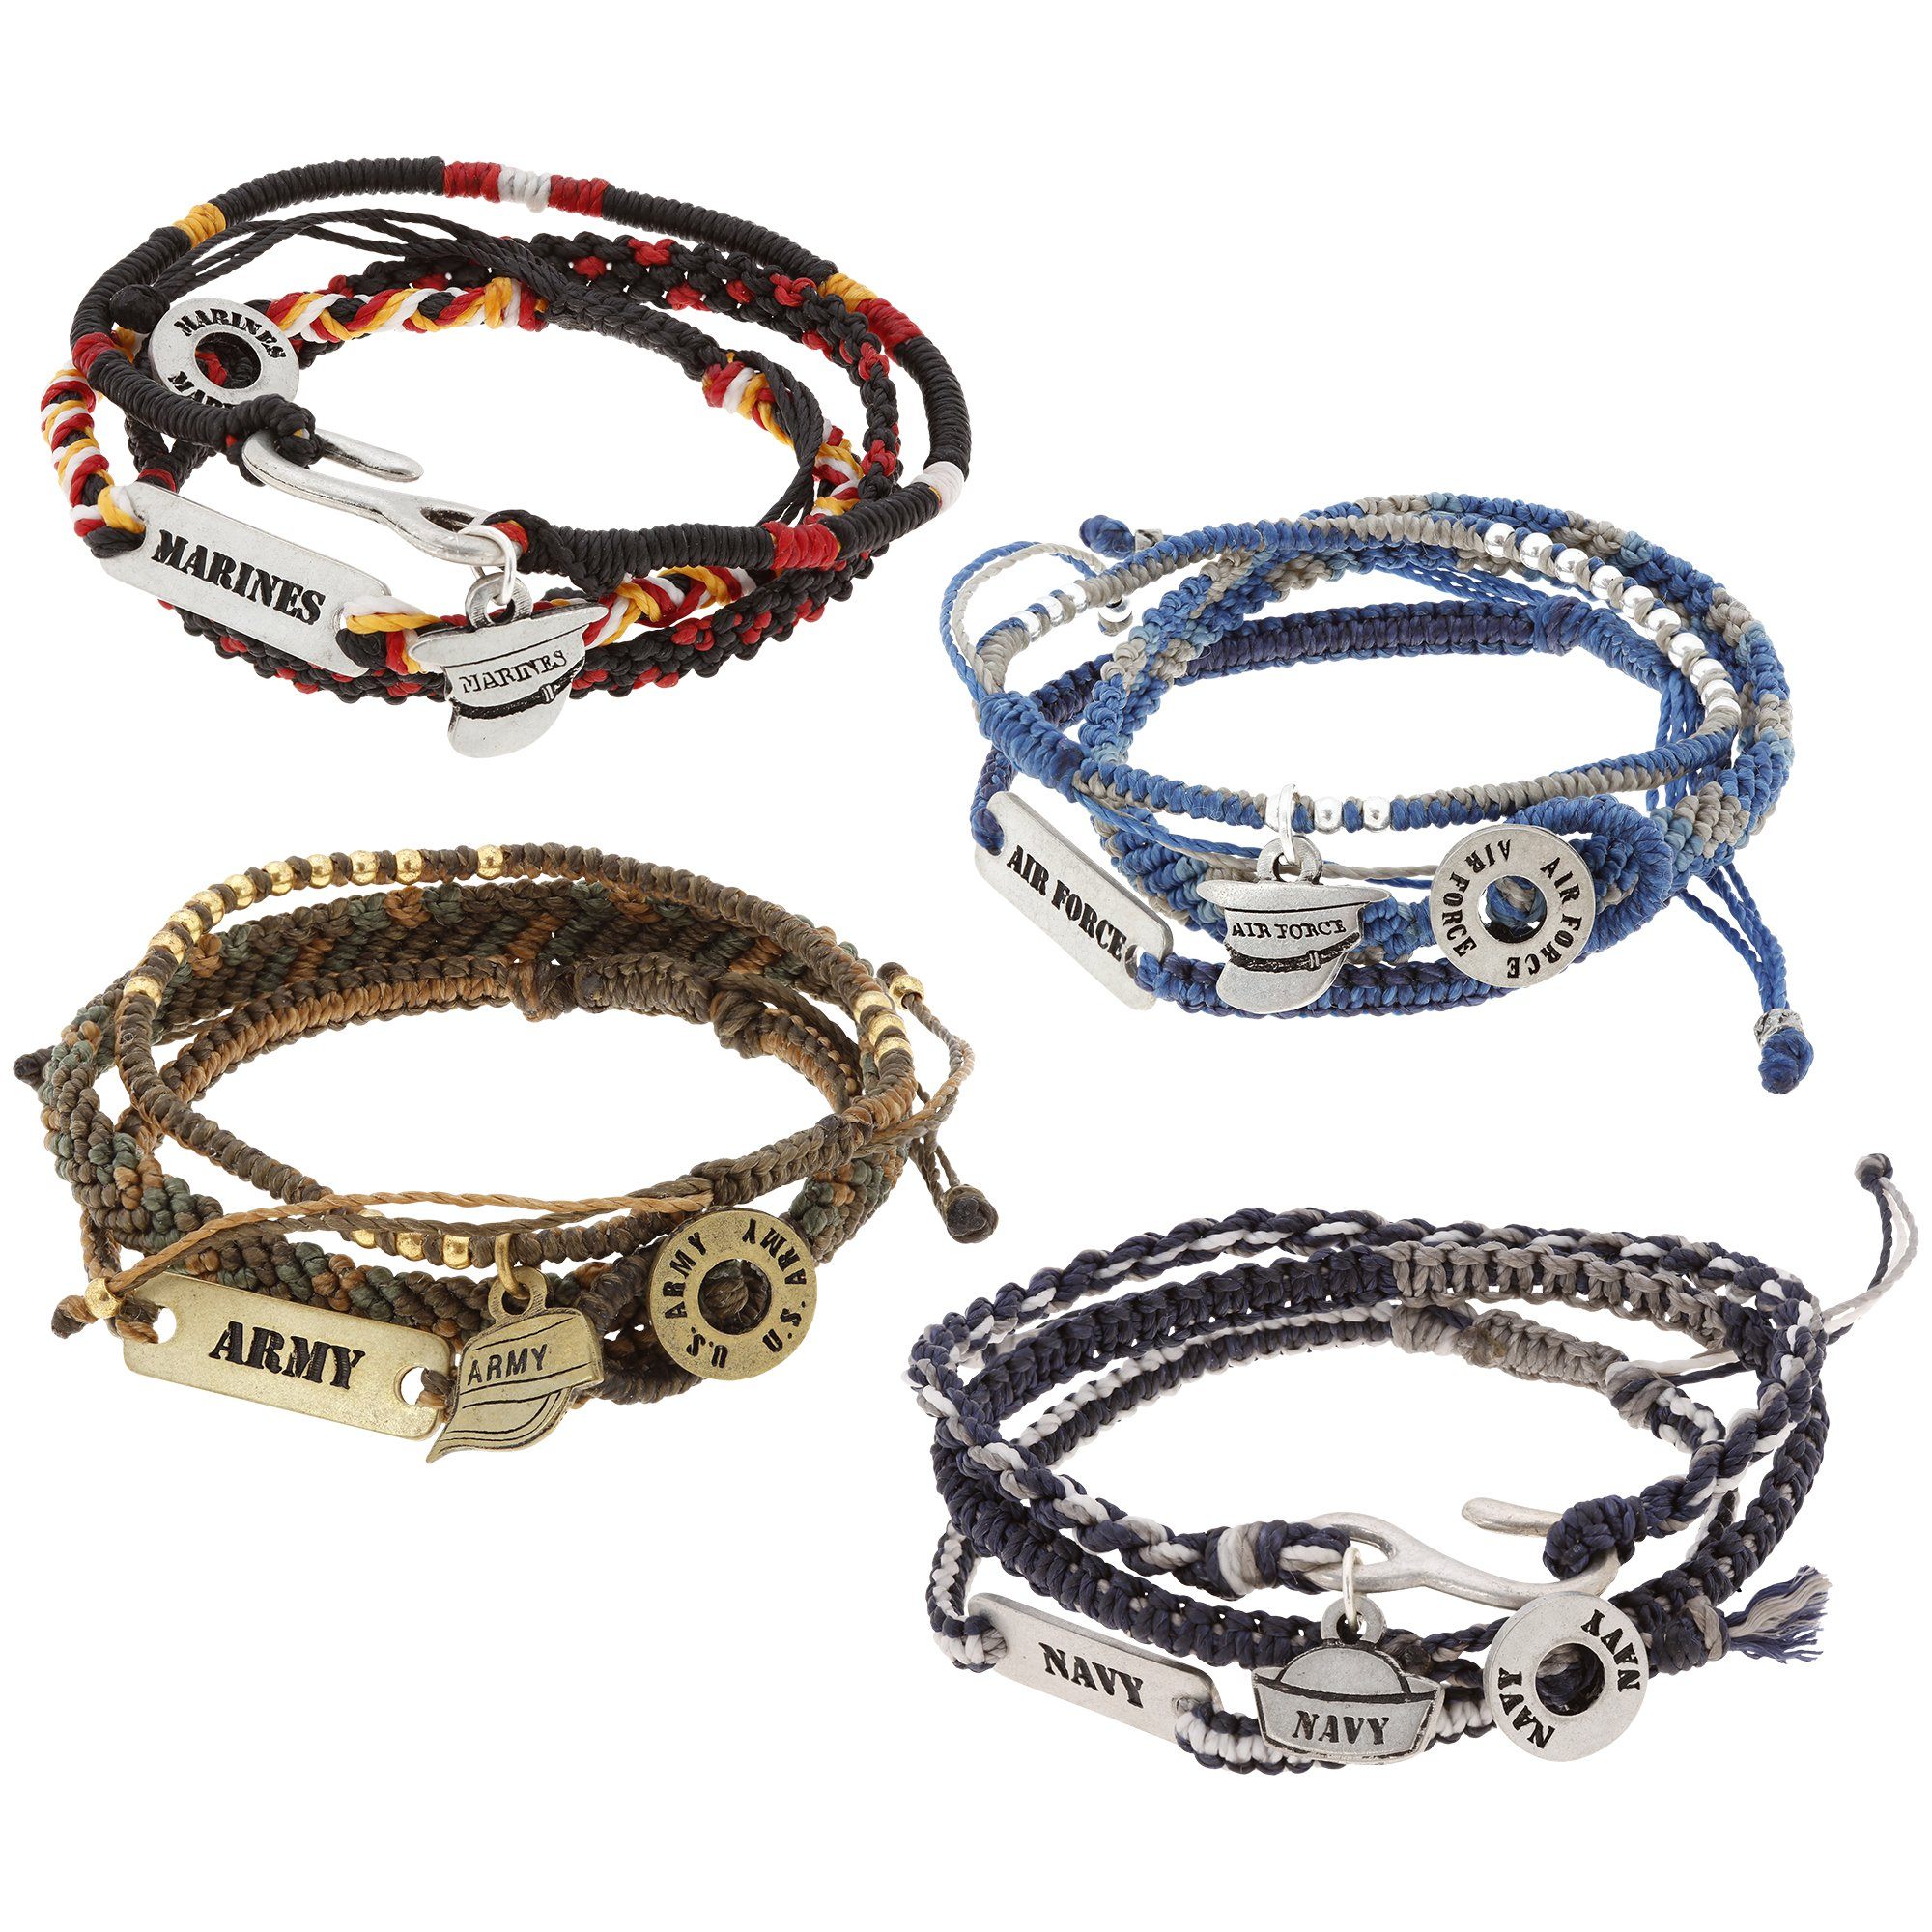 Military Hat Woven Bracelet Trio - Air Force